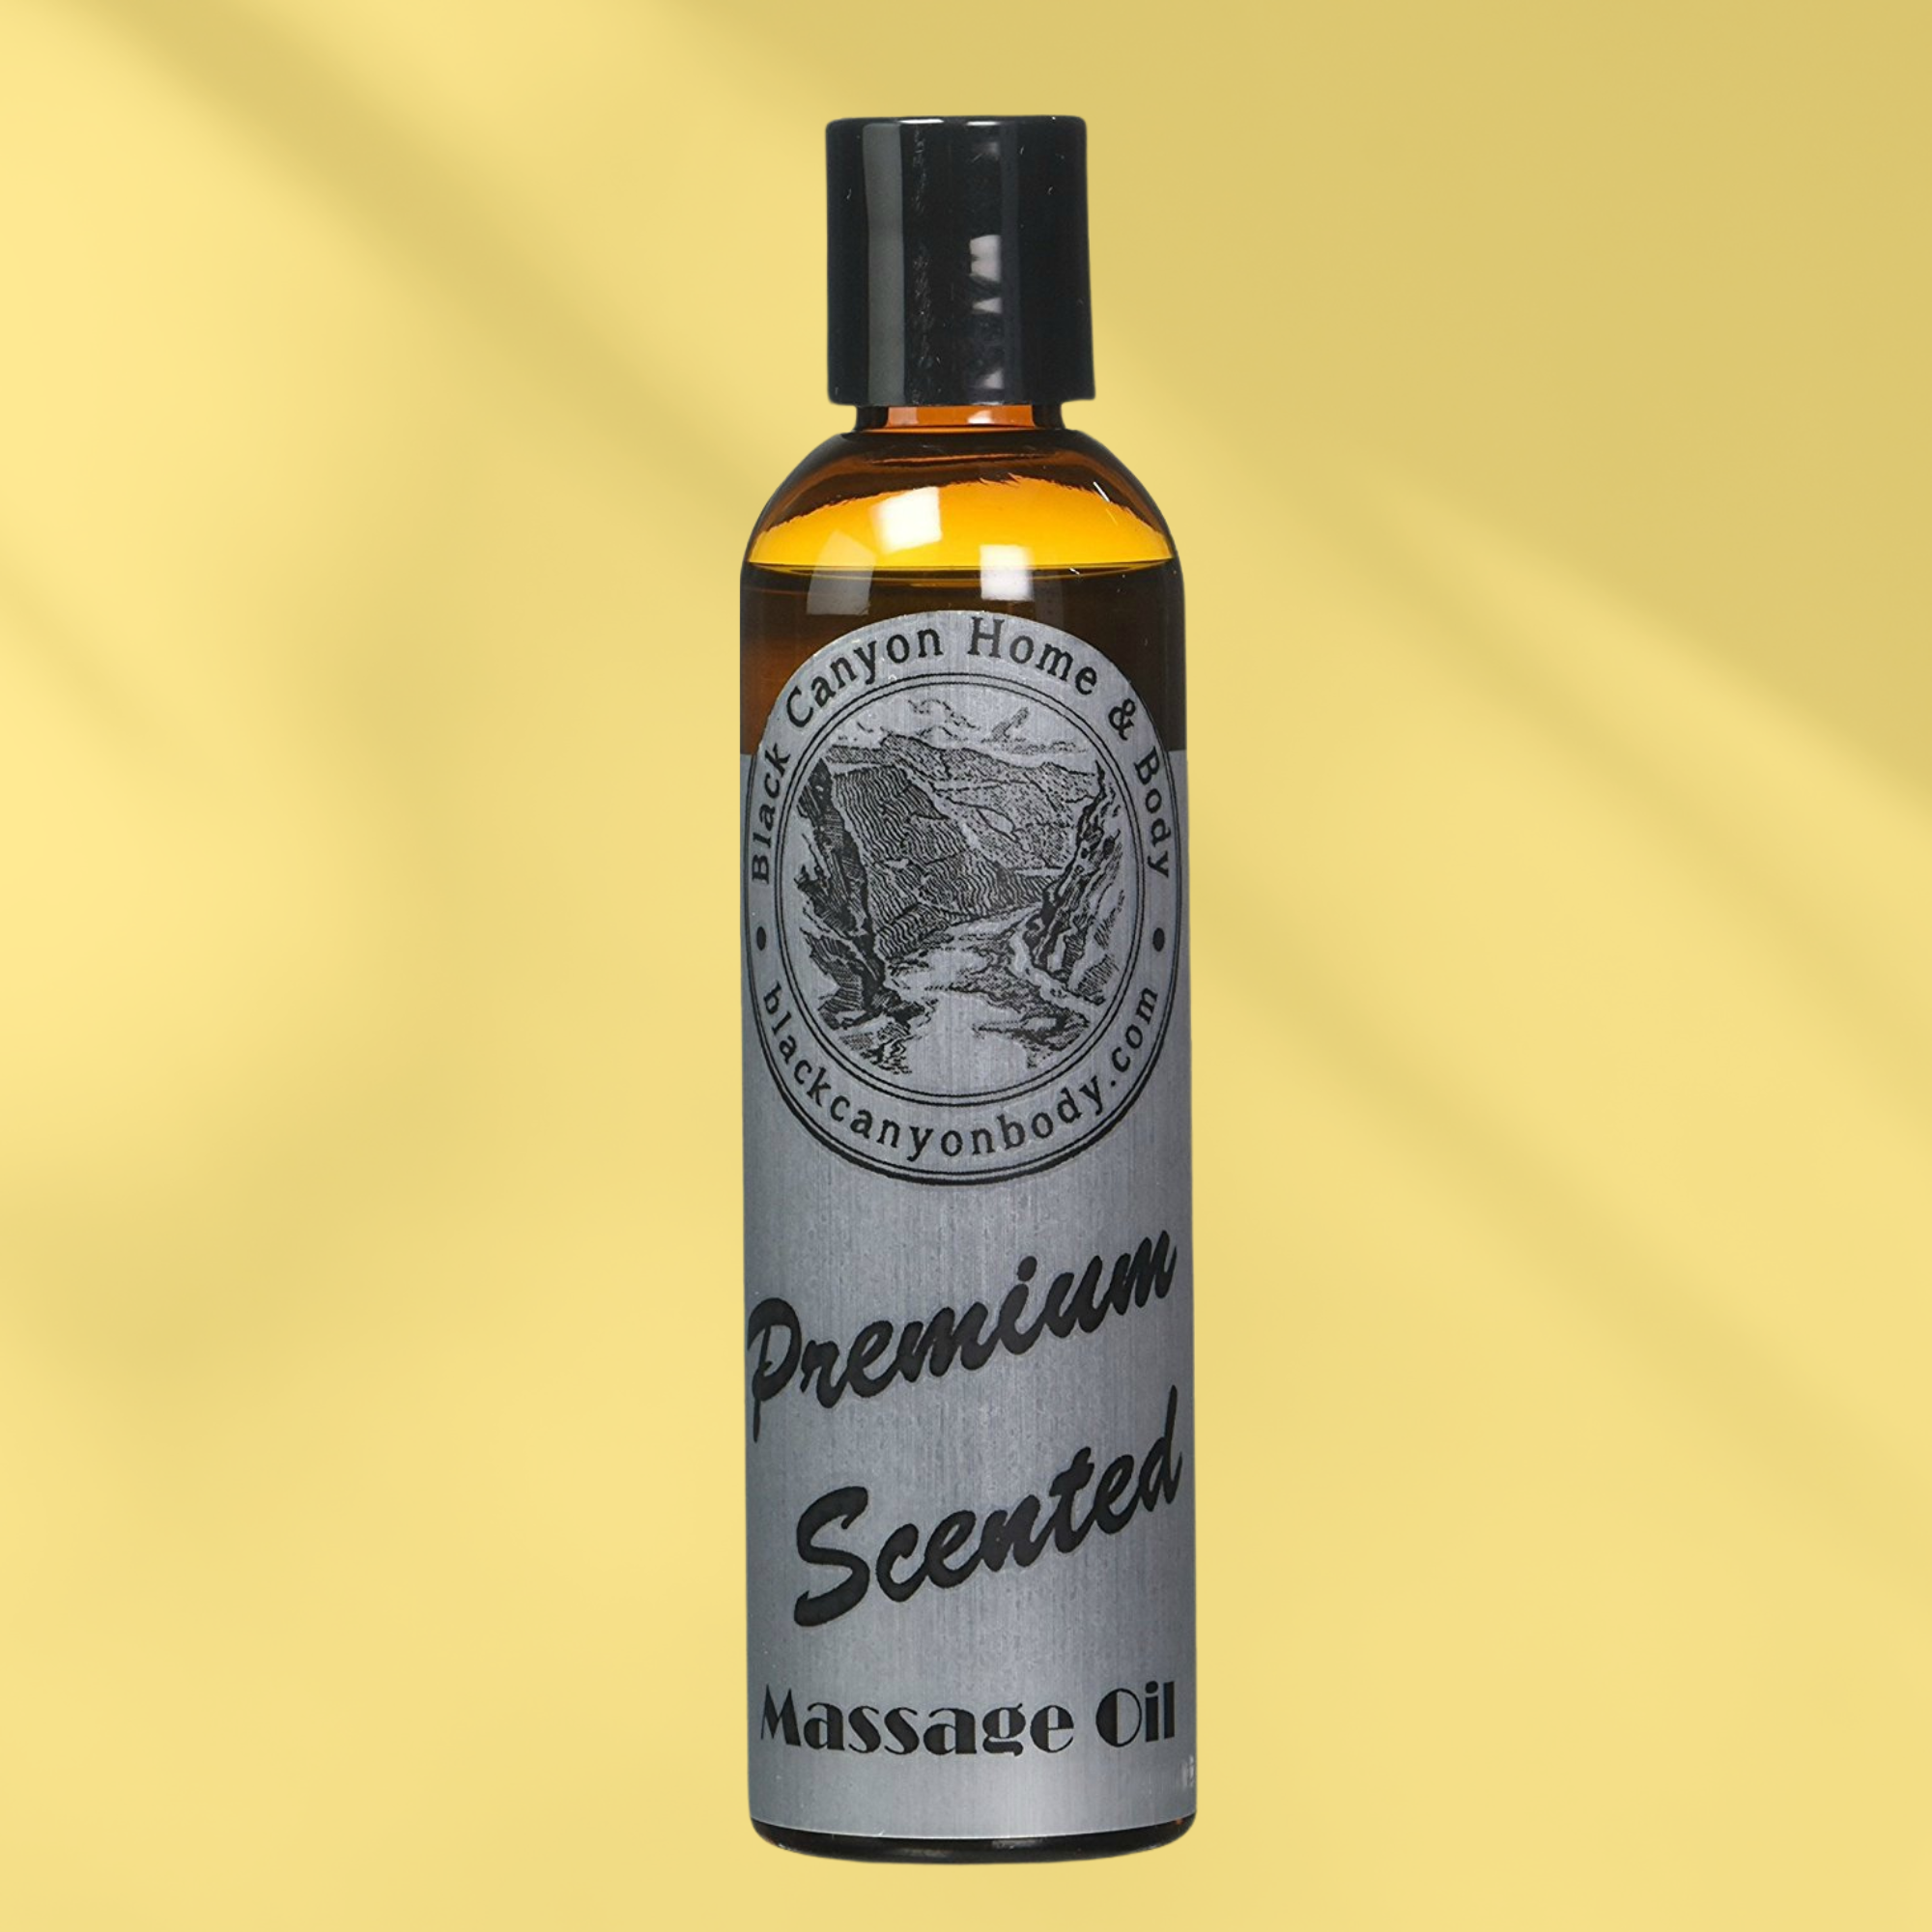 Black Canyon Strawberry Seduction Scented Massage Oil